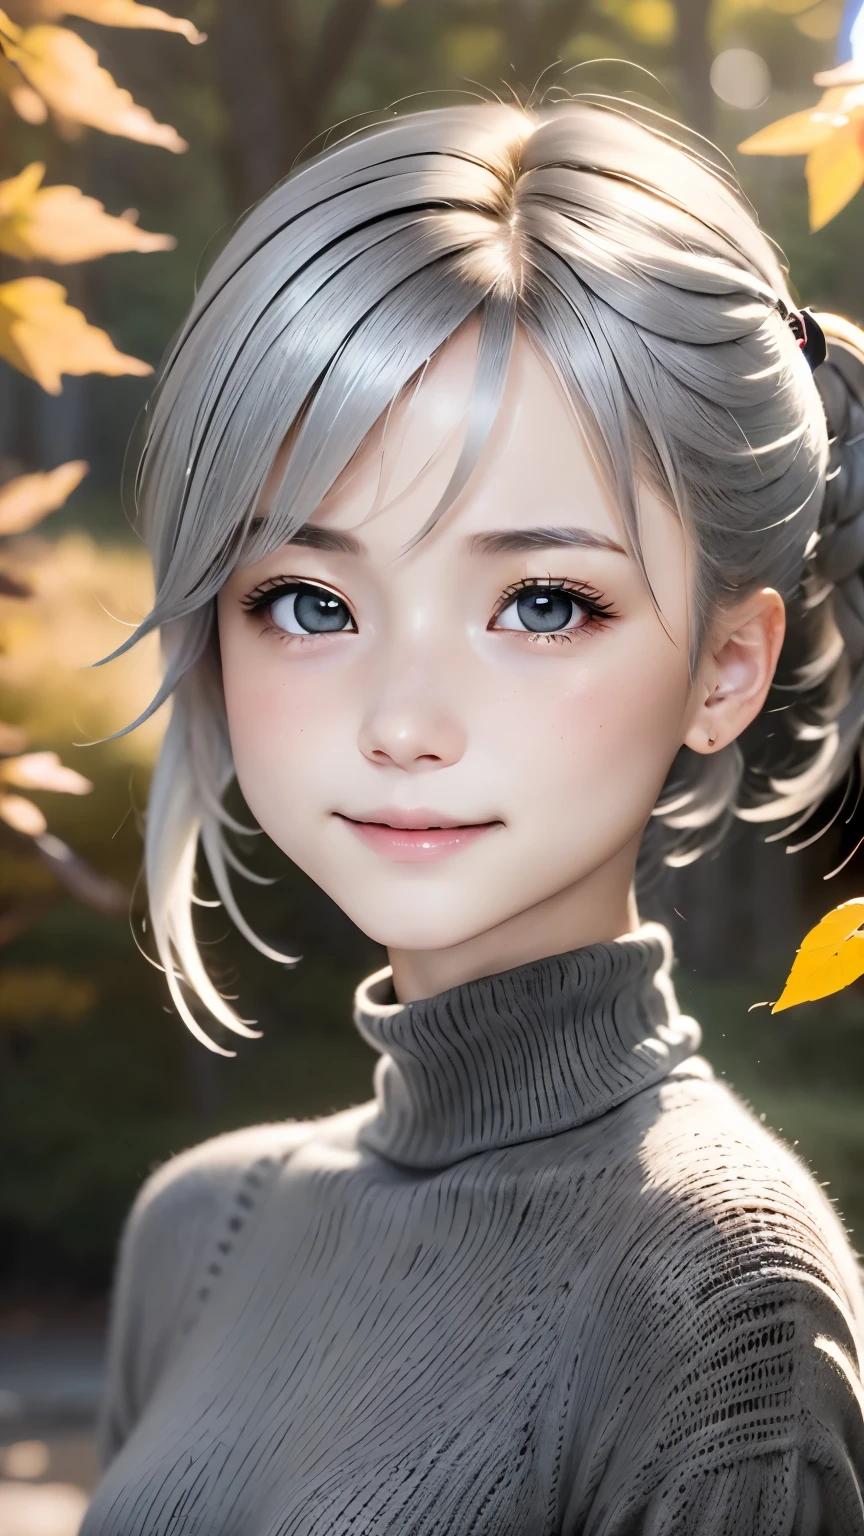 close, portrait, head shot, model shooting style, looking at the viewer,１４talent、 direct eye contact, White-sama, 1 girl, smile, (Ash gray hair), shortcut、Twintails with short hair、Knitted Black Turtleneck,small breasts,freckles, autumn park, Depth of bounds written, blurred background, skin details, fine eyes, Warm volumetric lighting, masterpiece, highest quality ,ultra high resolution、８ｋ    